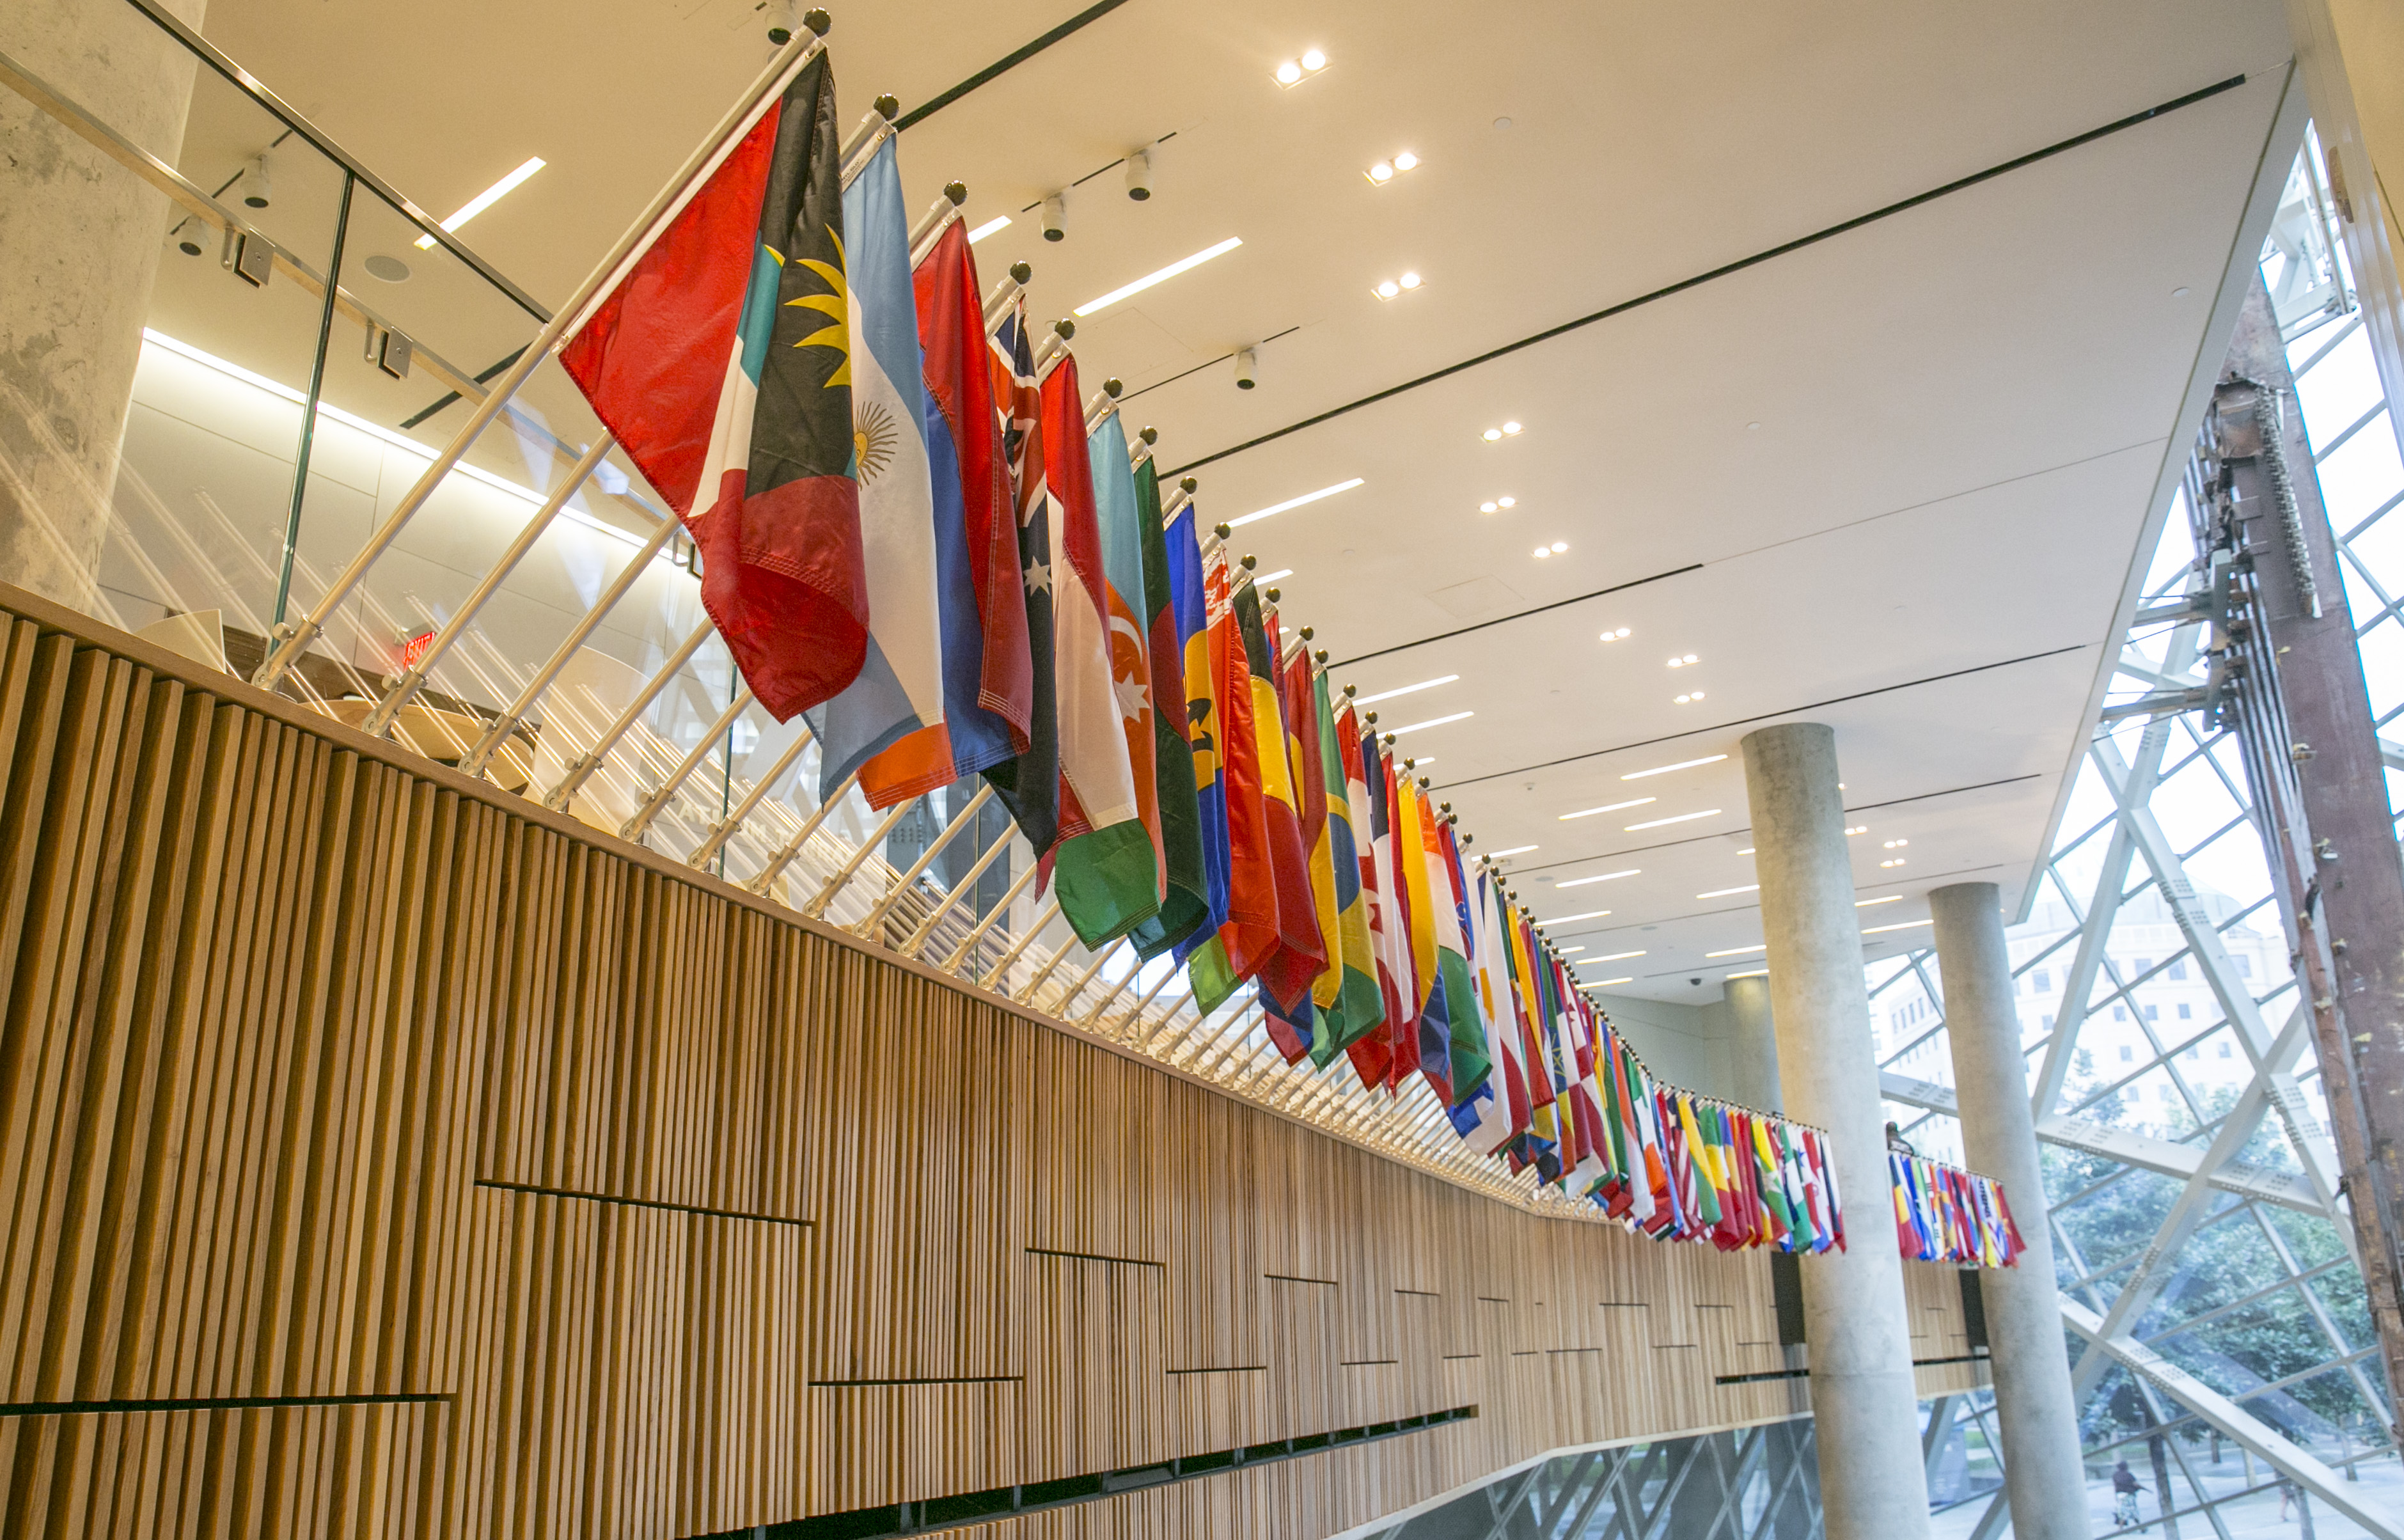 Ninety-nine international flags fly at the 9/11 Memorial Museum pavilion in commemoration of the victims of 9/11.